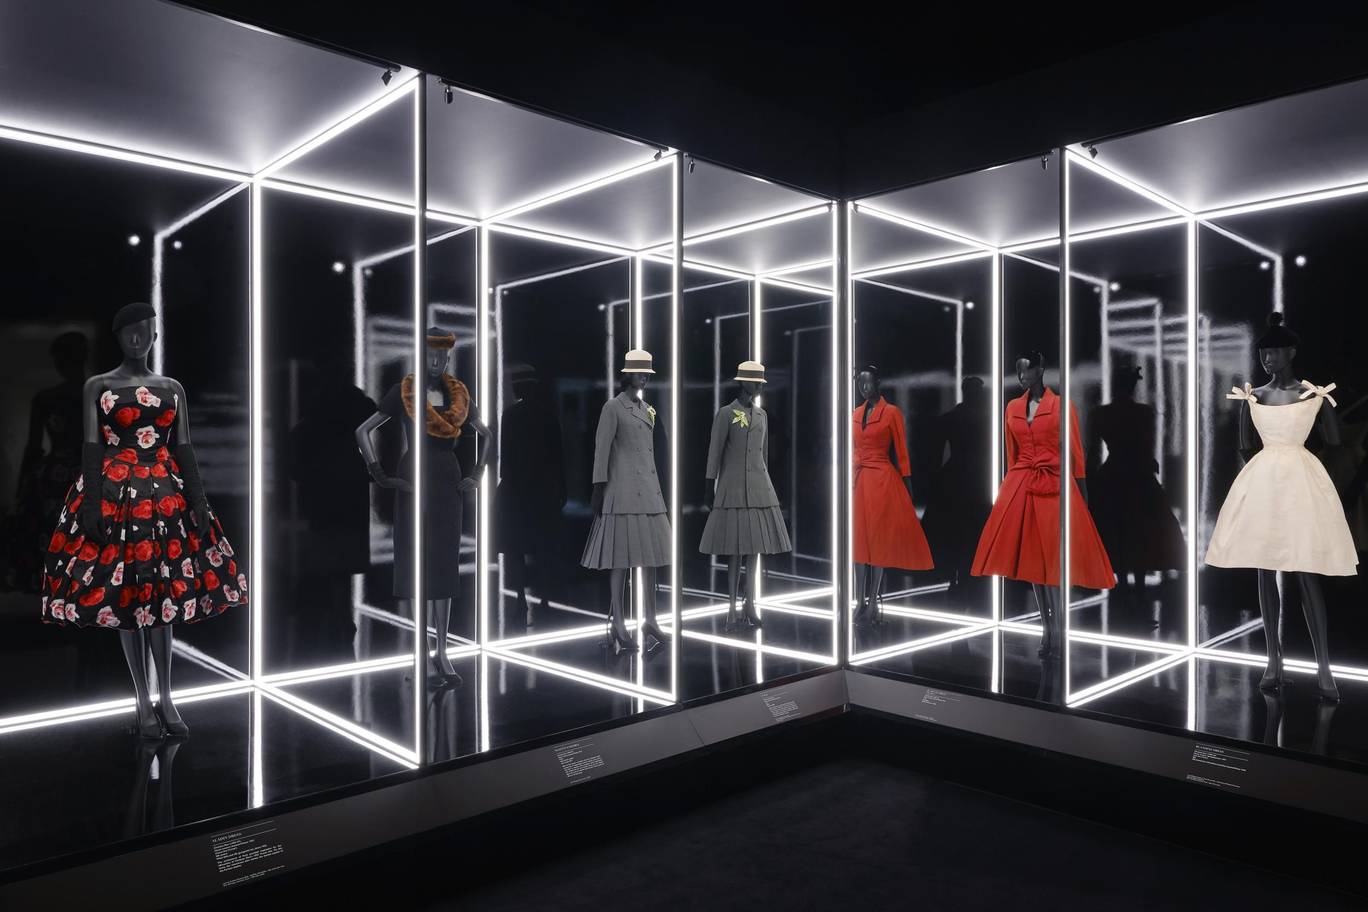 Christian Dior: Designer of Dreams review – style over substance